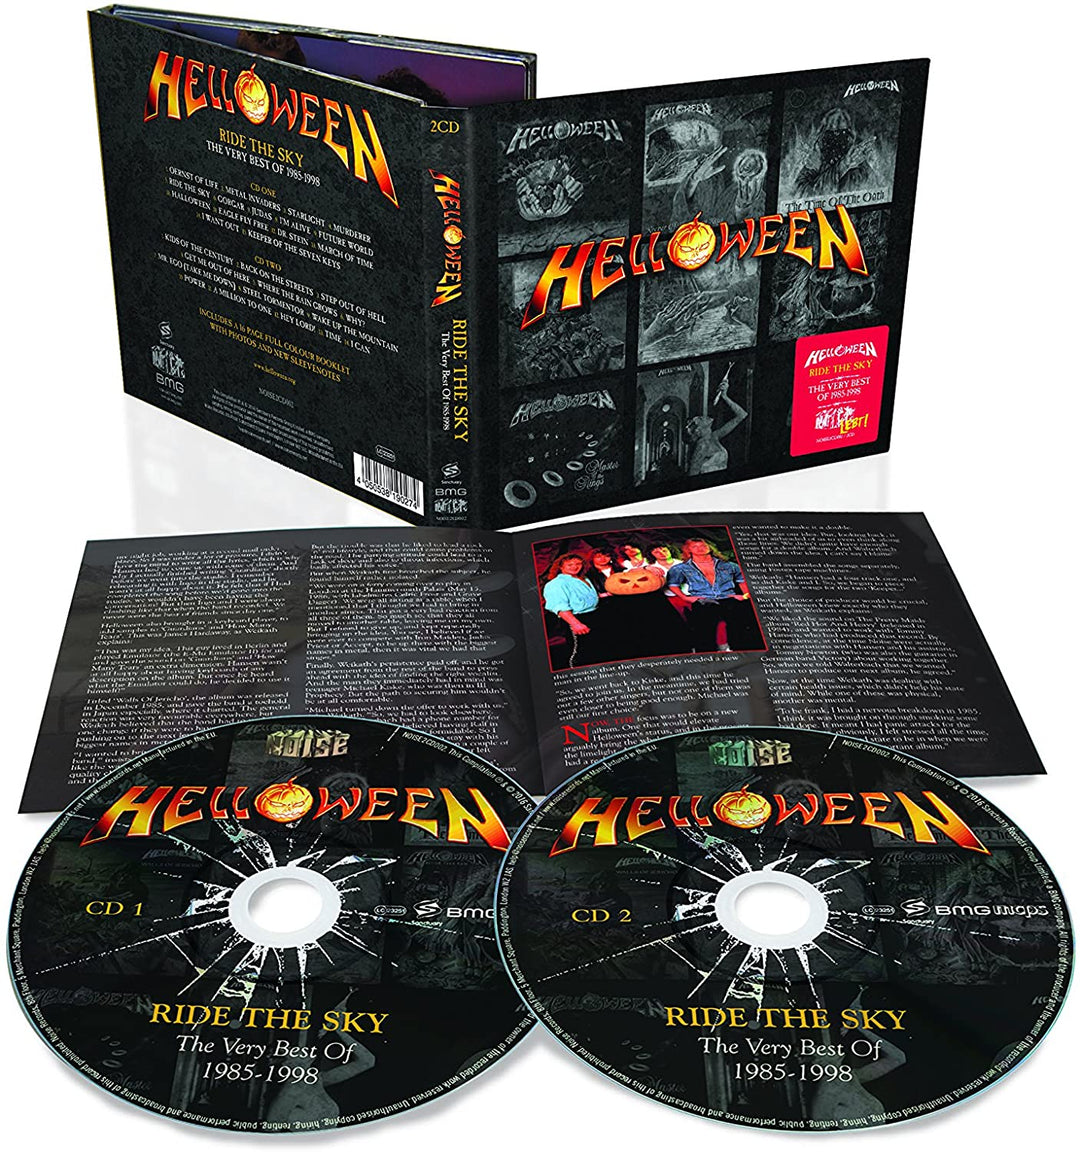 Helloween - Ride The Sky - The Very Best Of 1985-1998 [Audio CD]